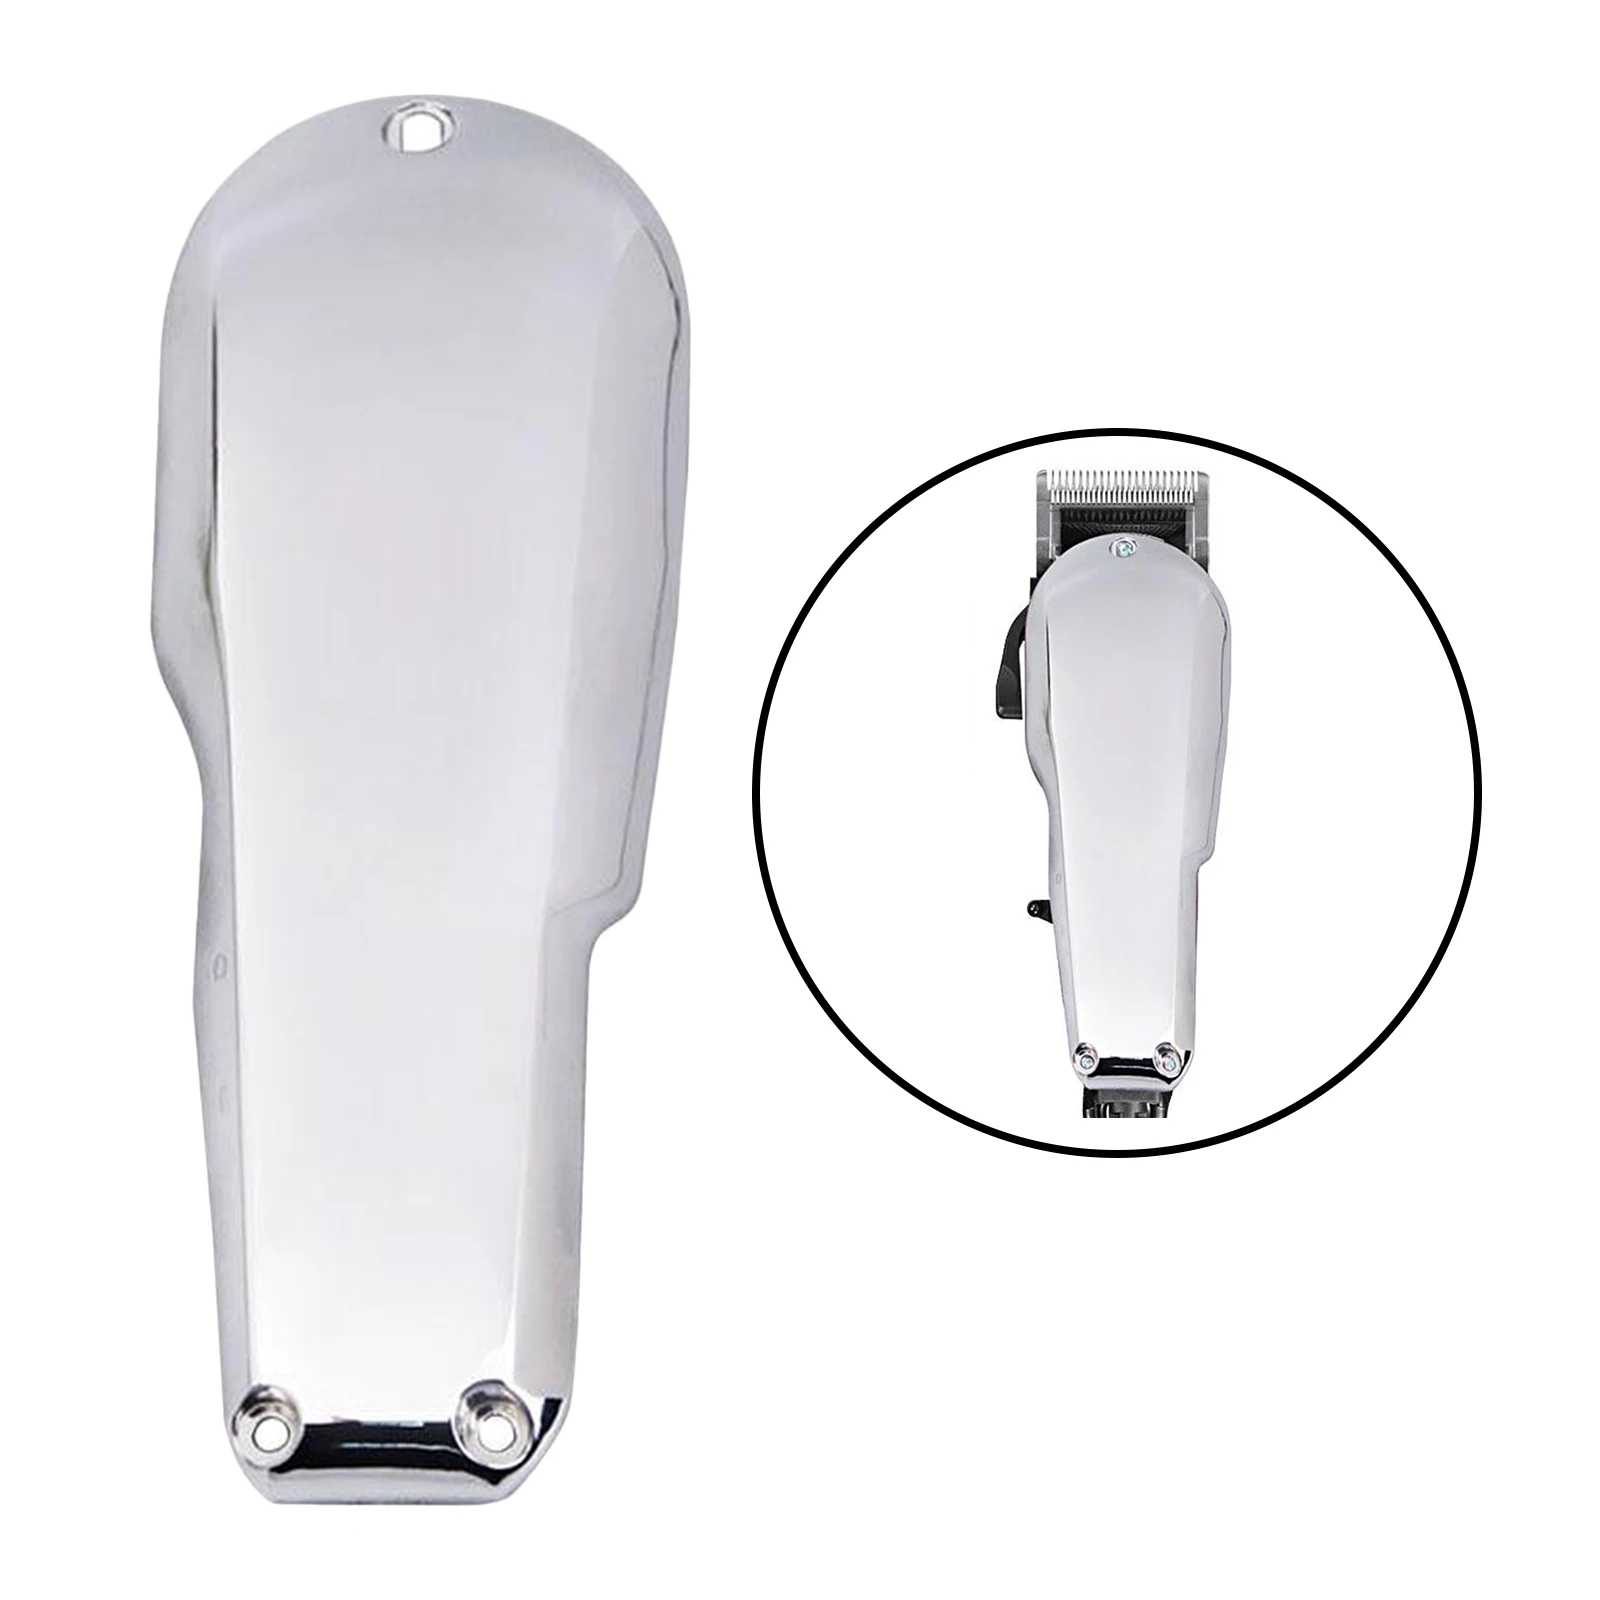 Replacement Hair Clipper Front Shell Cover for Wahl 8147 Cordless Electric Hair Clippers